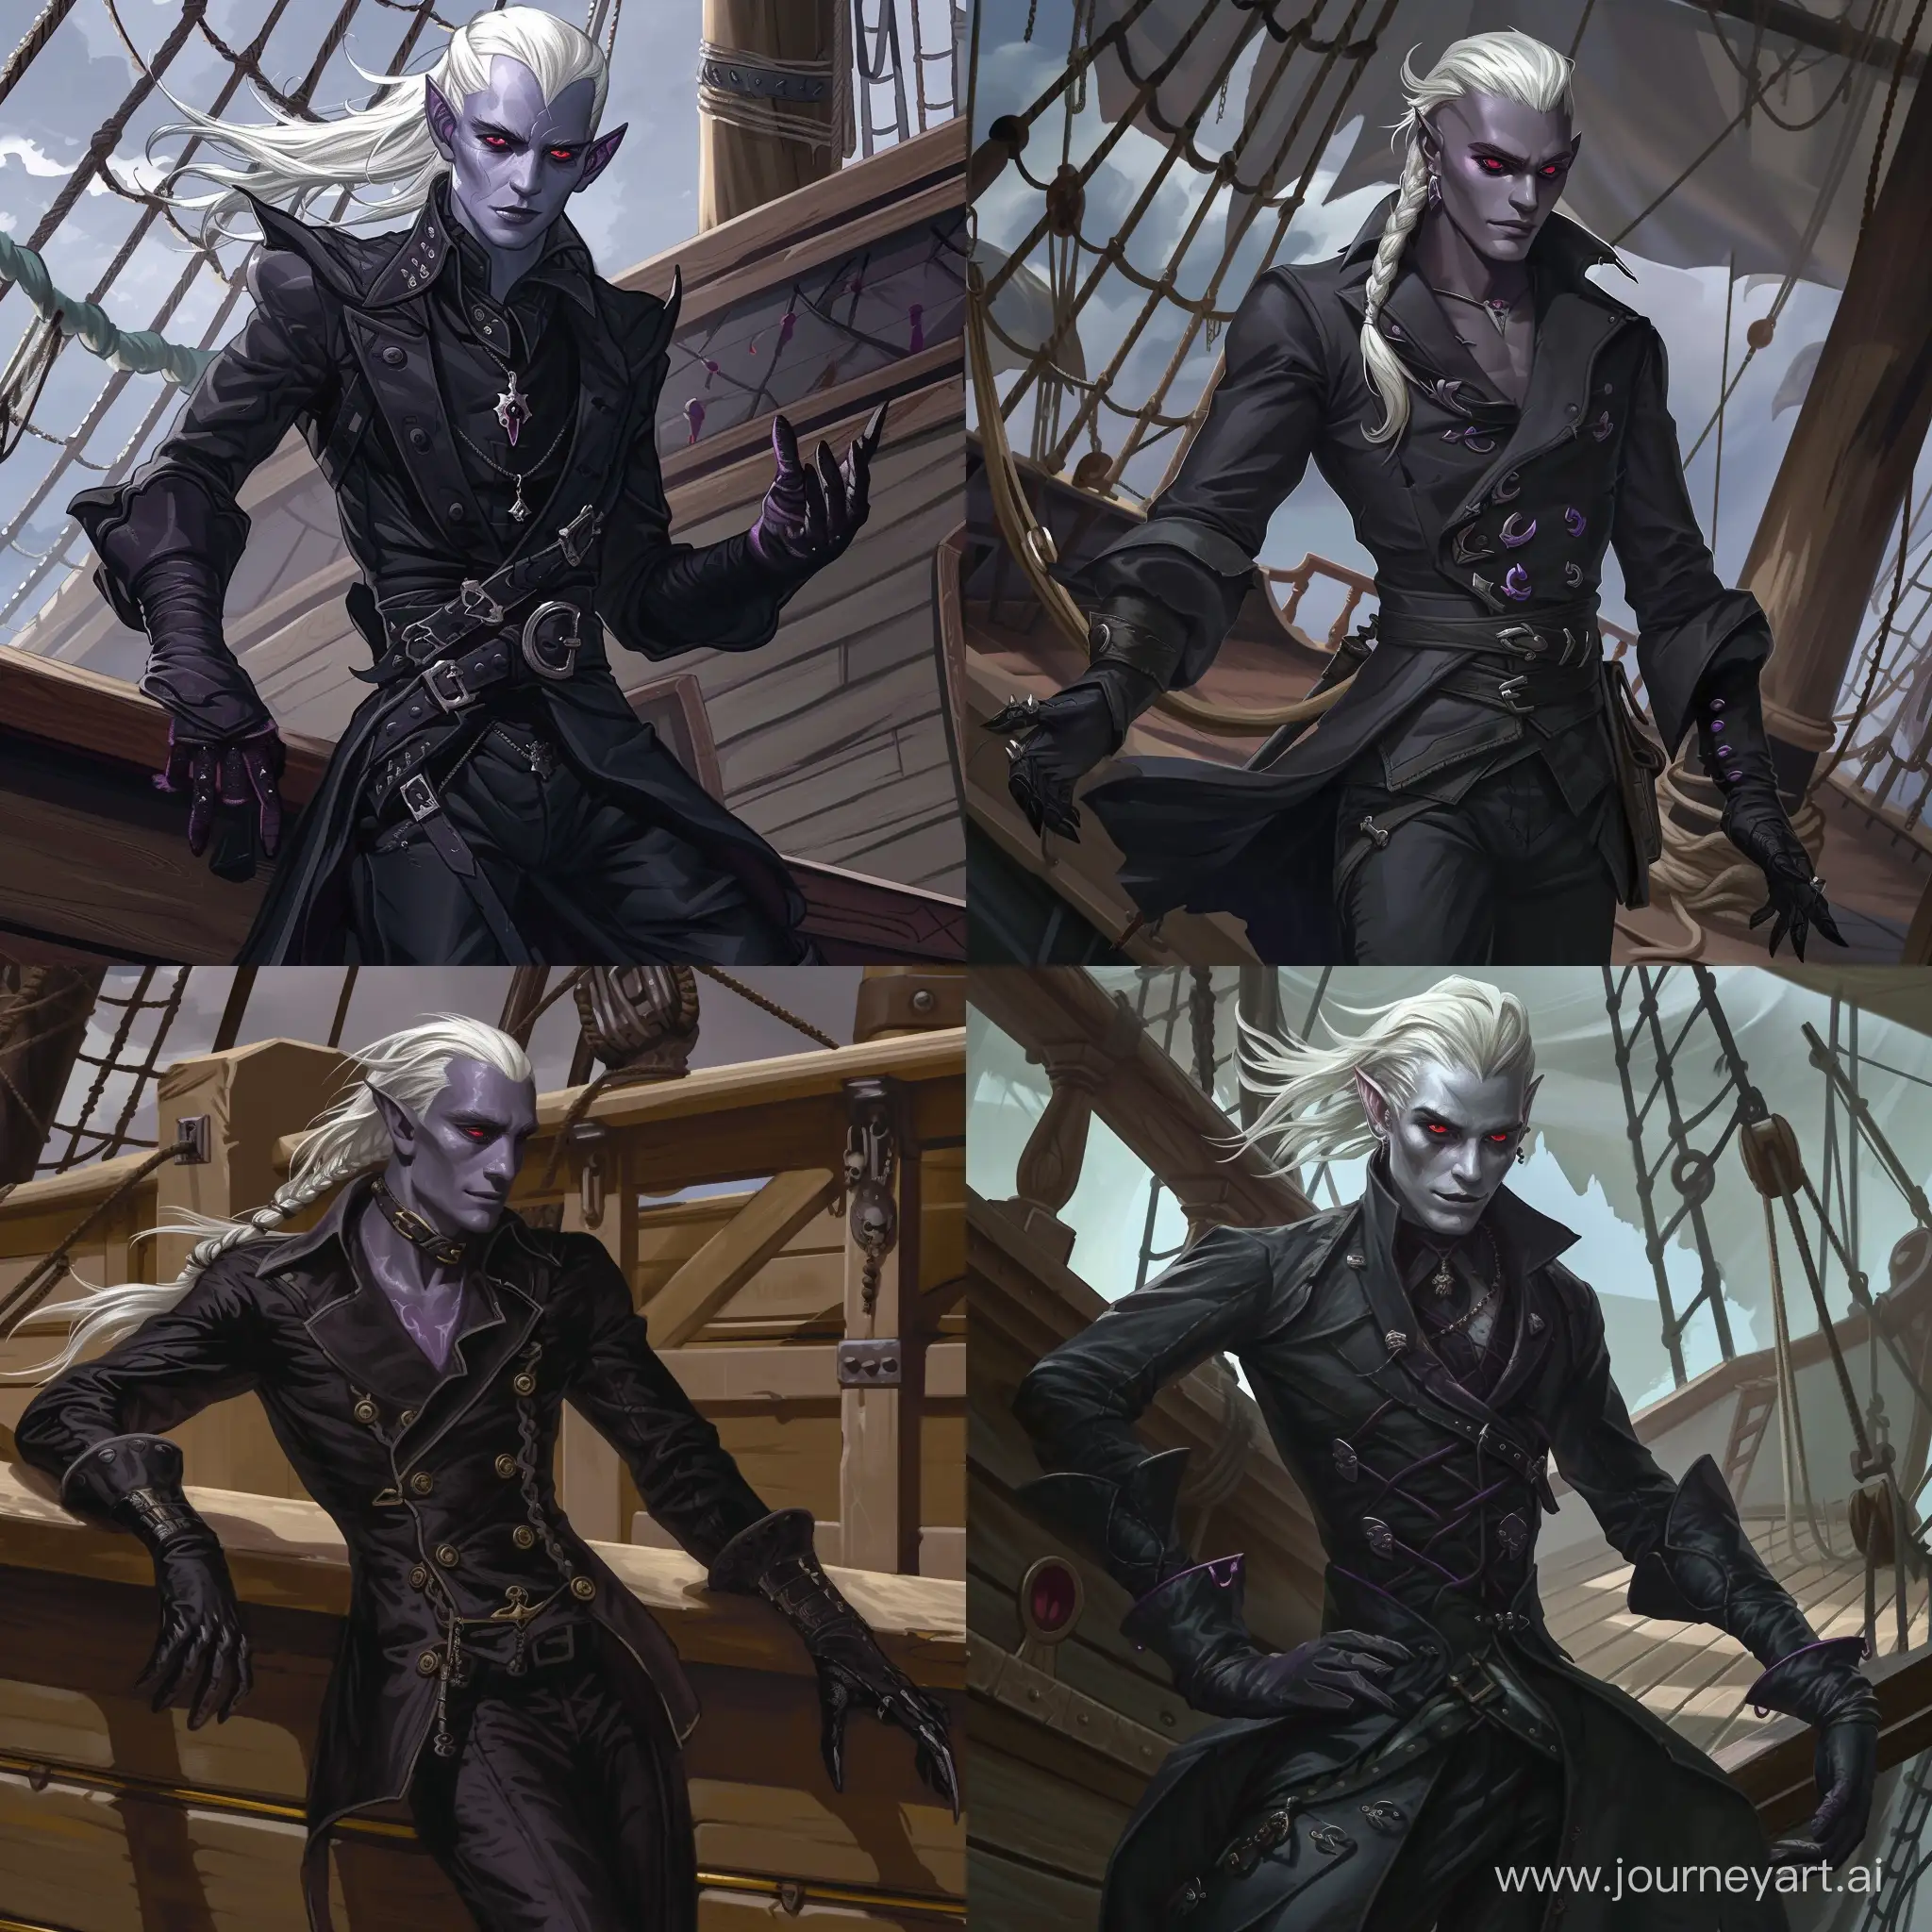 Handsome-Drow-Pirate-with-White-Hair-and-Red-Eyes-on-Pirate-Ship-Deck